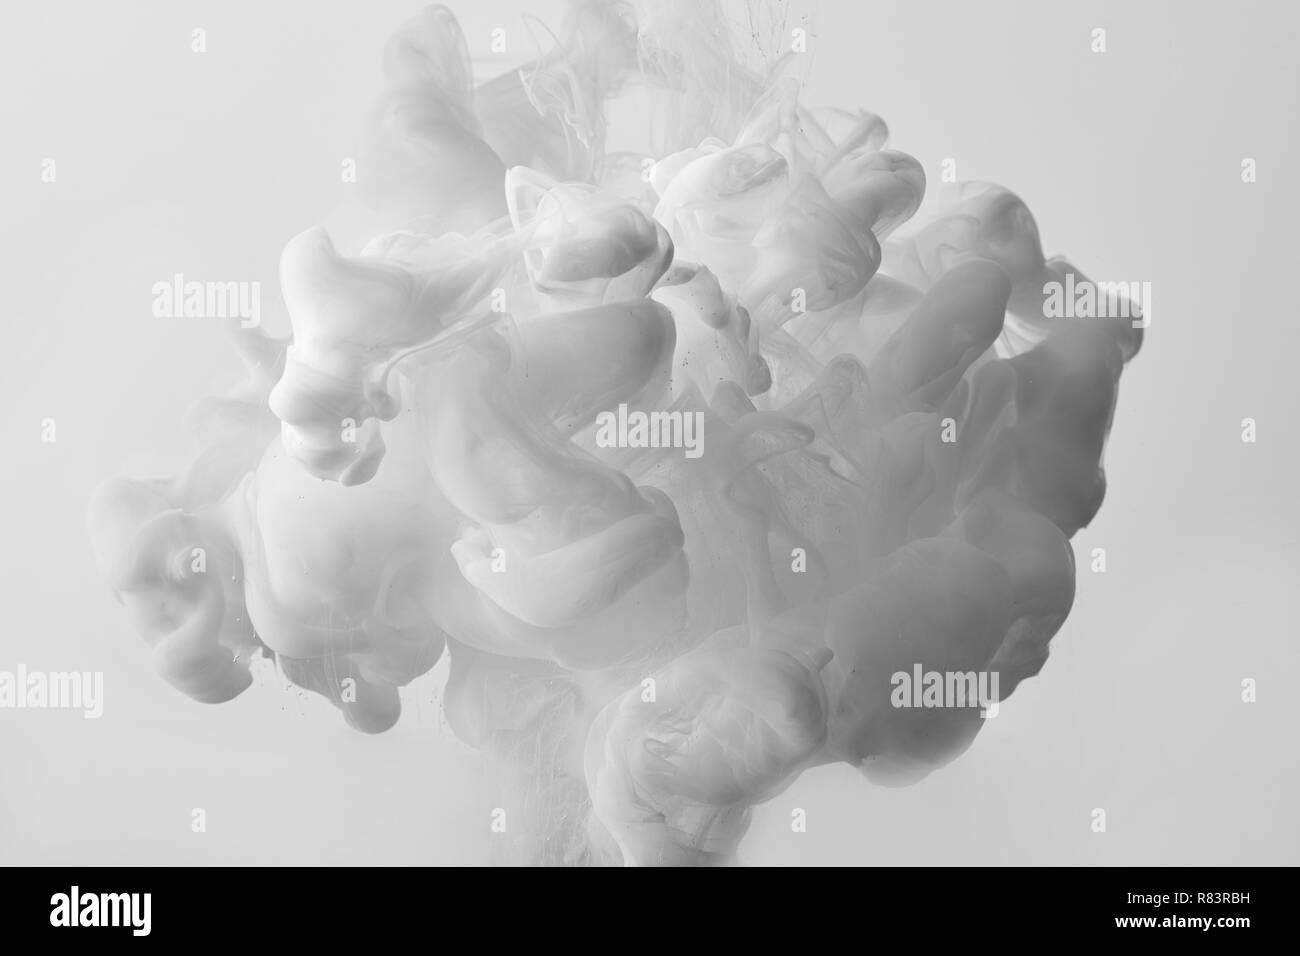 abstract background with white swirls of paint Stock Photo